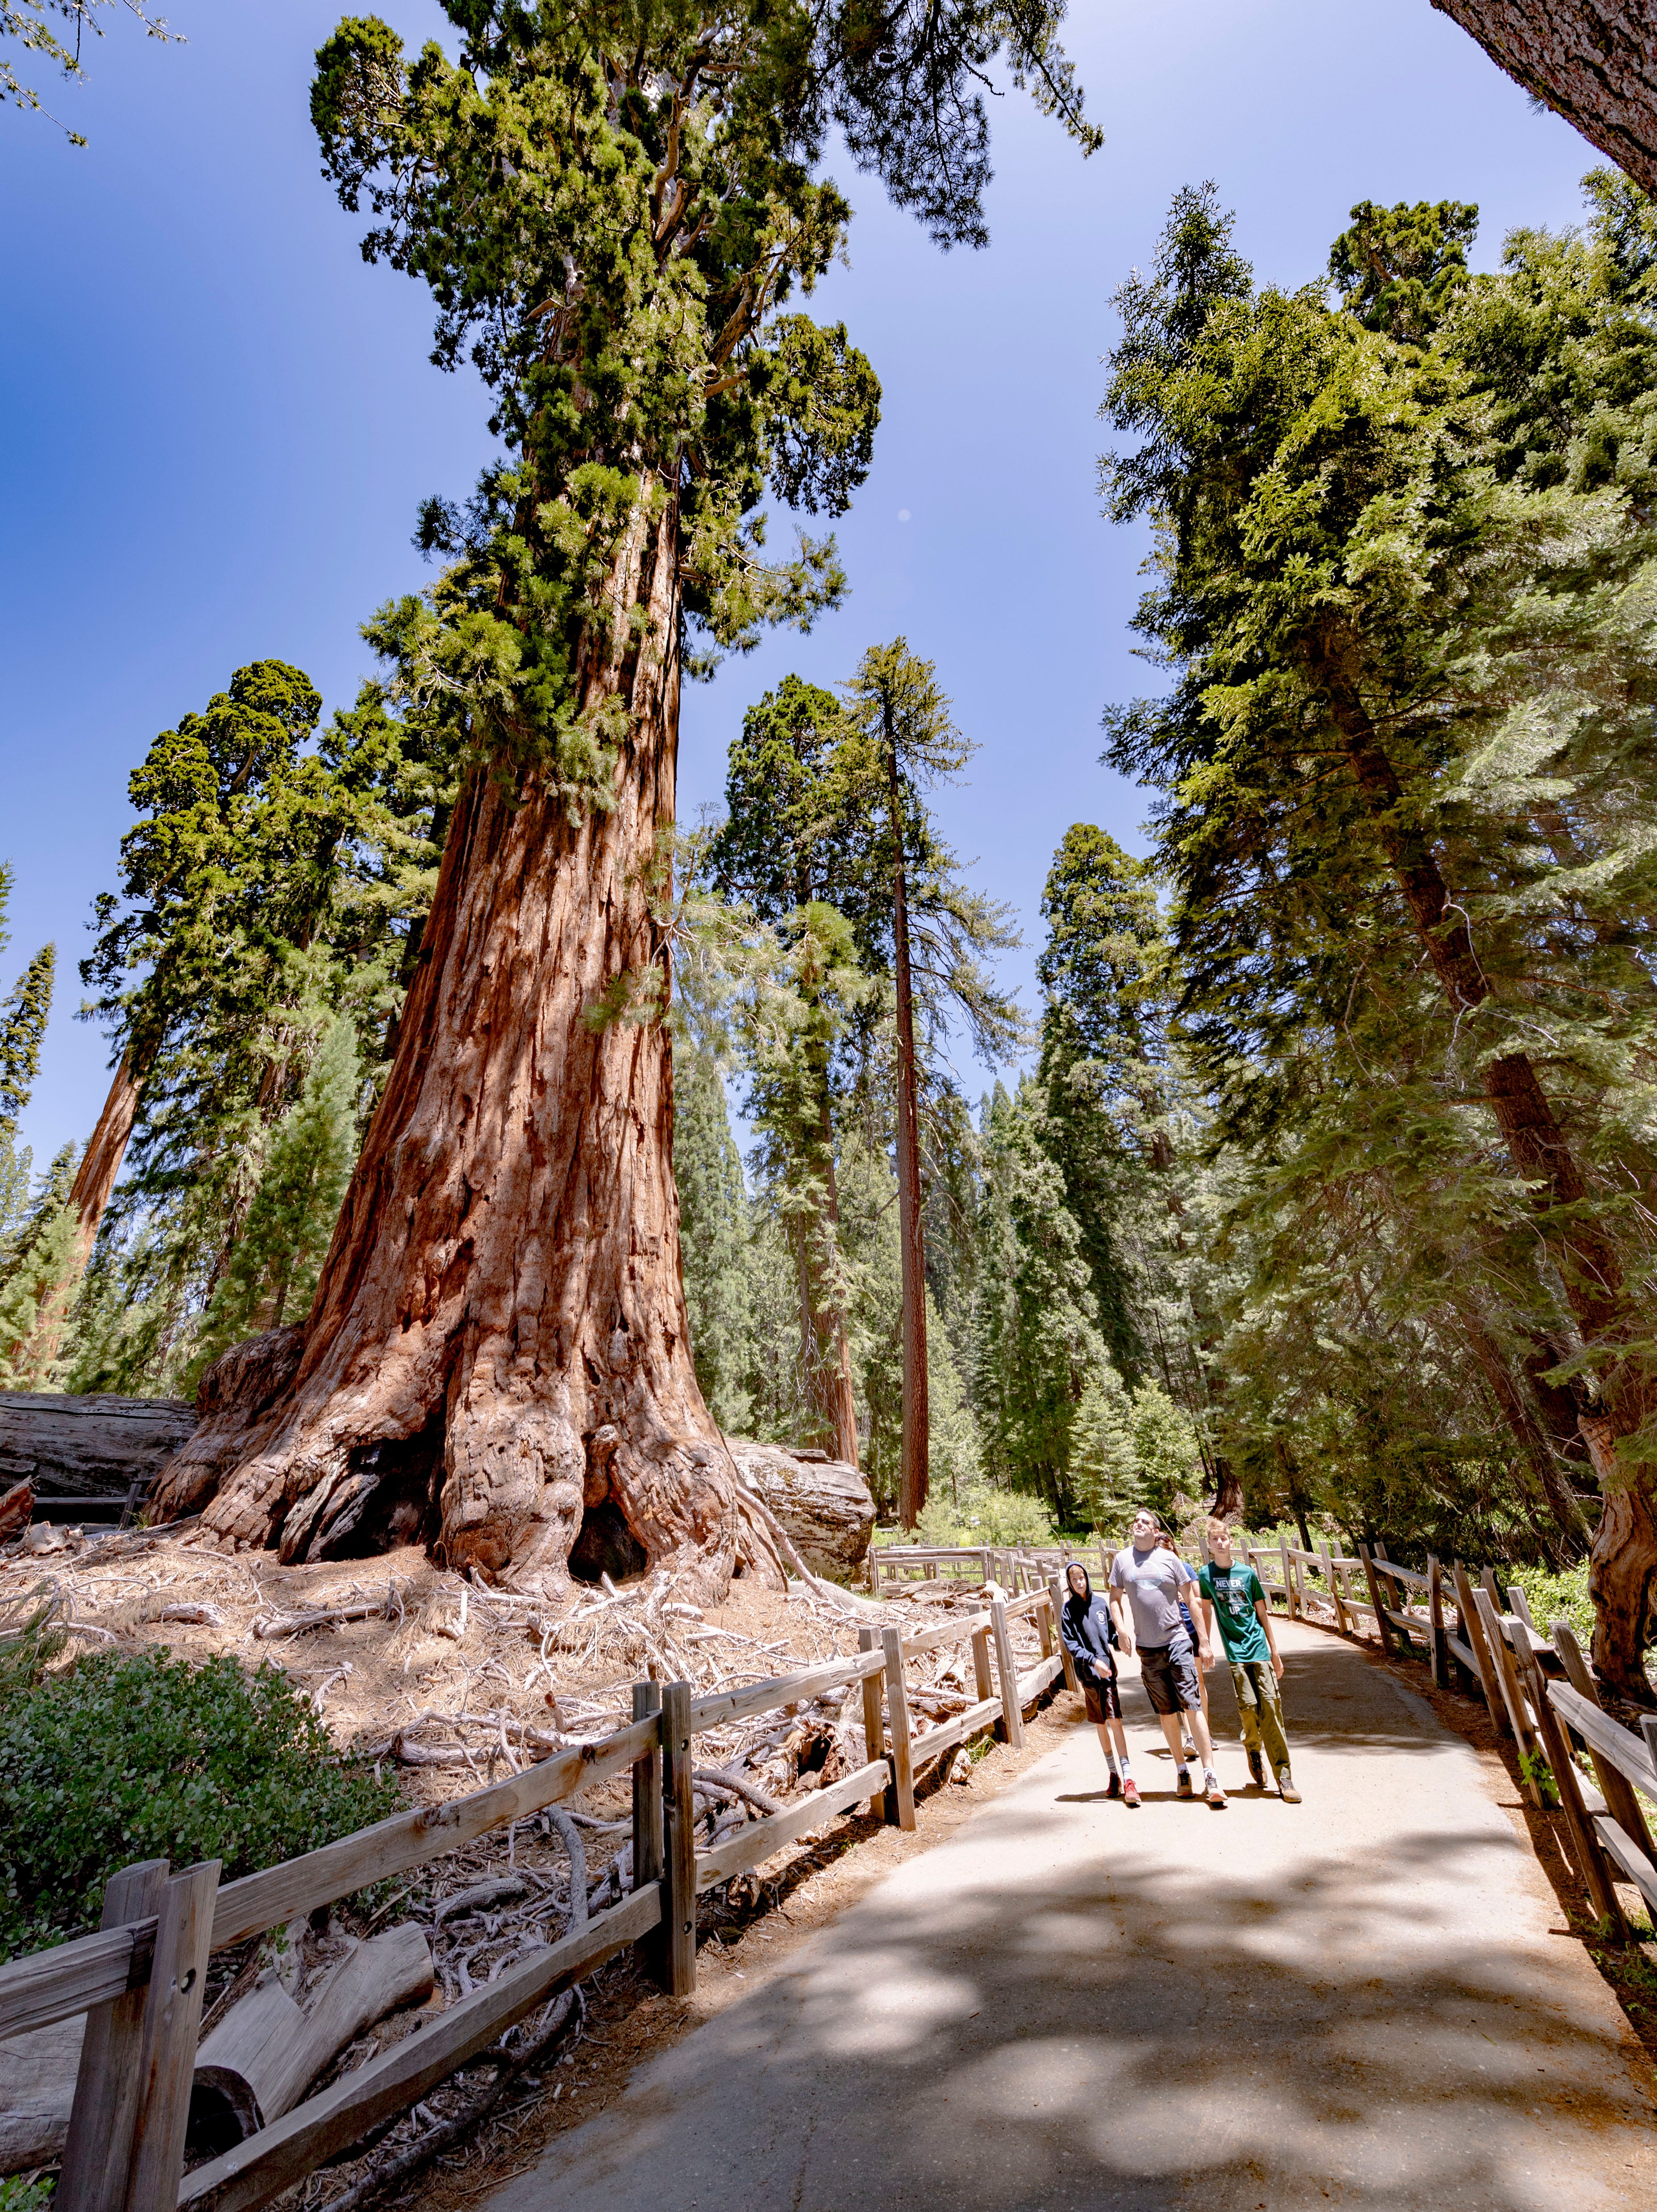 Sequoia, Kings Canyon to remove mentions of General Lee tree